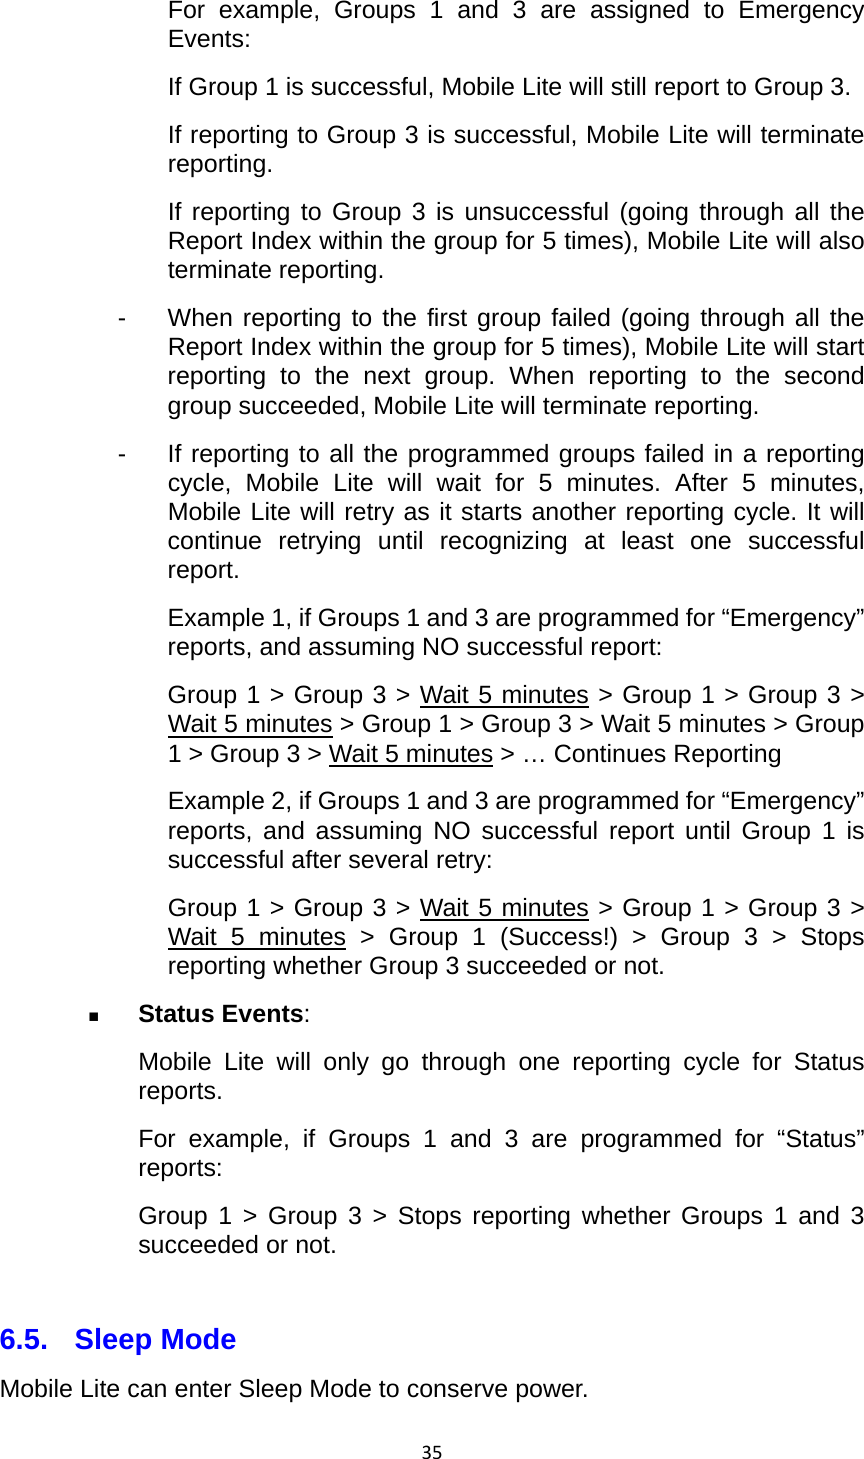 35For example, Groups 1 and 3 are assigned to Emergency Events: If Group 1 is successful, Mobile Lite will still report to Group 3. If reporting to Group 3 is successful, Mobile Lite will terminate reporting. If reporting to Group 3 is unsuccessful (going through all the Report Index within the group for 5 times), Mobile Lite will also terminate reporting. -  When reporting to the first group failed (going through all the Report Index within the group for 5 times), Mobile Lite will start reporting to the next group. When reporting to the second group succeeded, Mobile Lite will terminate reporting. -  If reporting to all the programmed groups failed in a reporting cycle, Mobile Lite will wait for 5 minutes. After 5 minutes, Mobile Lite will retry as it starts another reporting cycle. It will continue retrying until recognizing at least one successful report. Example 1, if Groups 1 and 3 are programmed for “Emergency” reports, and assuming NO successful report: Group 1 &gt; Group 3 &gt; Wait 5 minutes &gt; Group 1 &gt; Group 3 &gt; Wait 5 minutes &gt; Group 1 &gt; Group 3 &gt; Wait 5 minutes &gt; Group 1 &gt; Group 3 &gt; Wait 5 minutes &gt; … Continues Reporting Example 2, if Groups 1 and 3 are programmed for “Emergency” reports, and assuming NO successful report until Group 1 is successful after several retry: Group 1 &gt; Group 3 &gt; Wait 5 minutes &gt; Group 1 &gt; Group 3 &gt; Wait 5 minutes &gt; Group 1 (Success!) &gt; Group 3 &gt; Stops reporting whether Group 3 succeeded or not.  Status Events: Mobile Lite will only go through one reporting cycle for Status reports. For example, if Groups 1 and 3 are programmed for “Status” reports: Group 1 &gt; Group 3 &gt; Stops reporting whether Groups 1 and 3 succeeded or not.  6.5. Sleep Mode Mobile Lite can enter Sleep Mode to conserve power. 